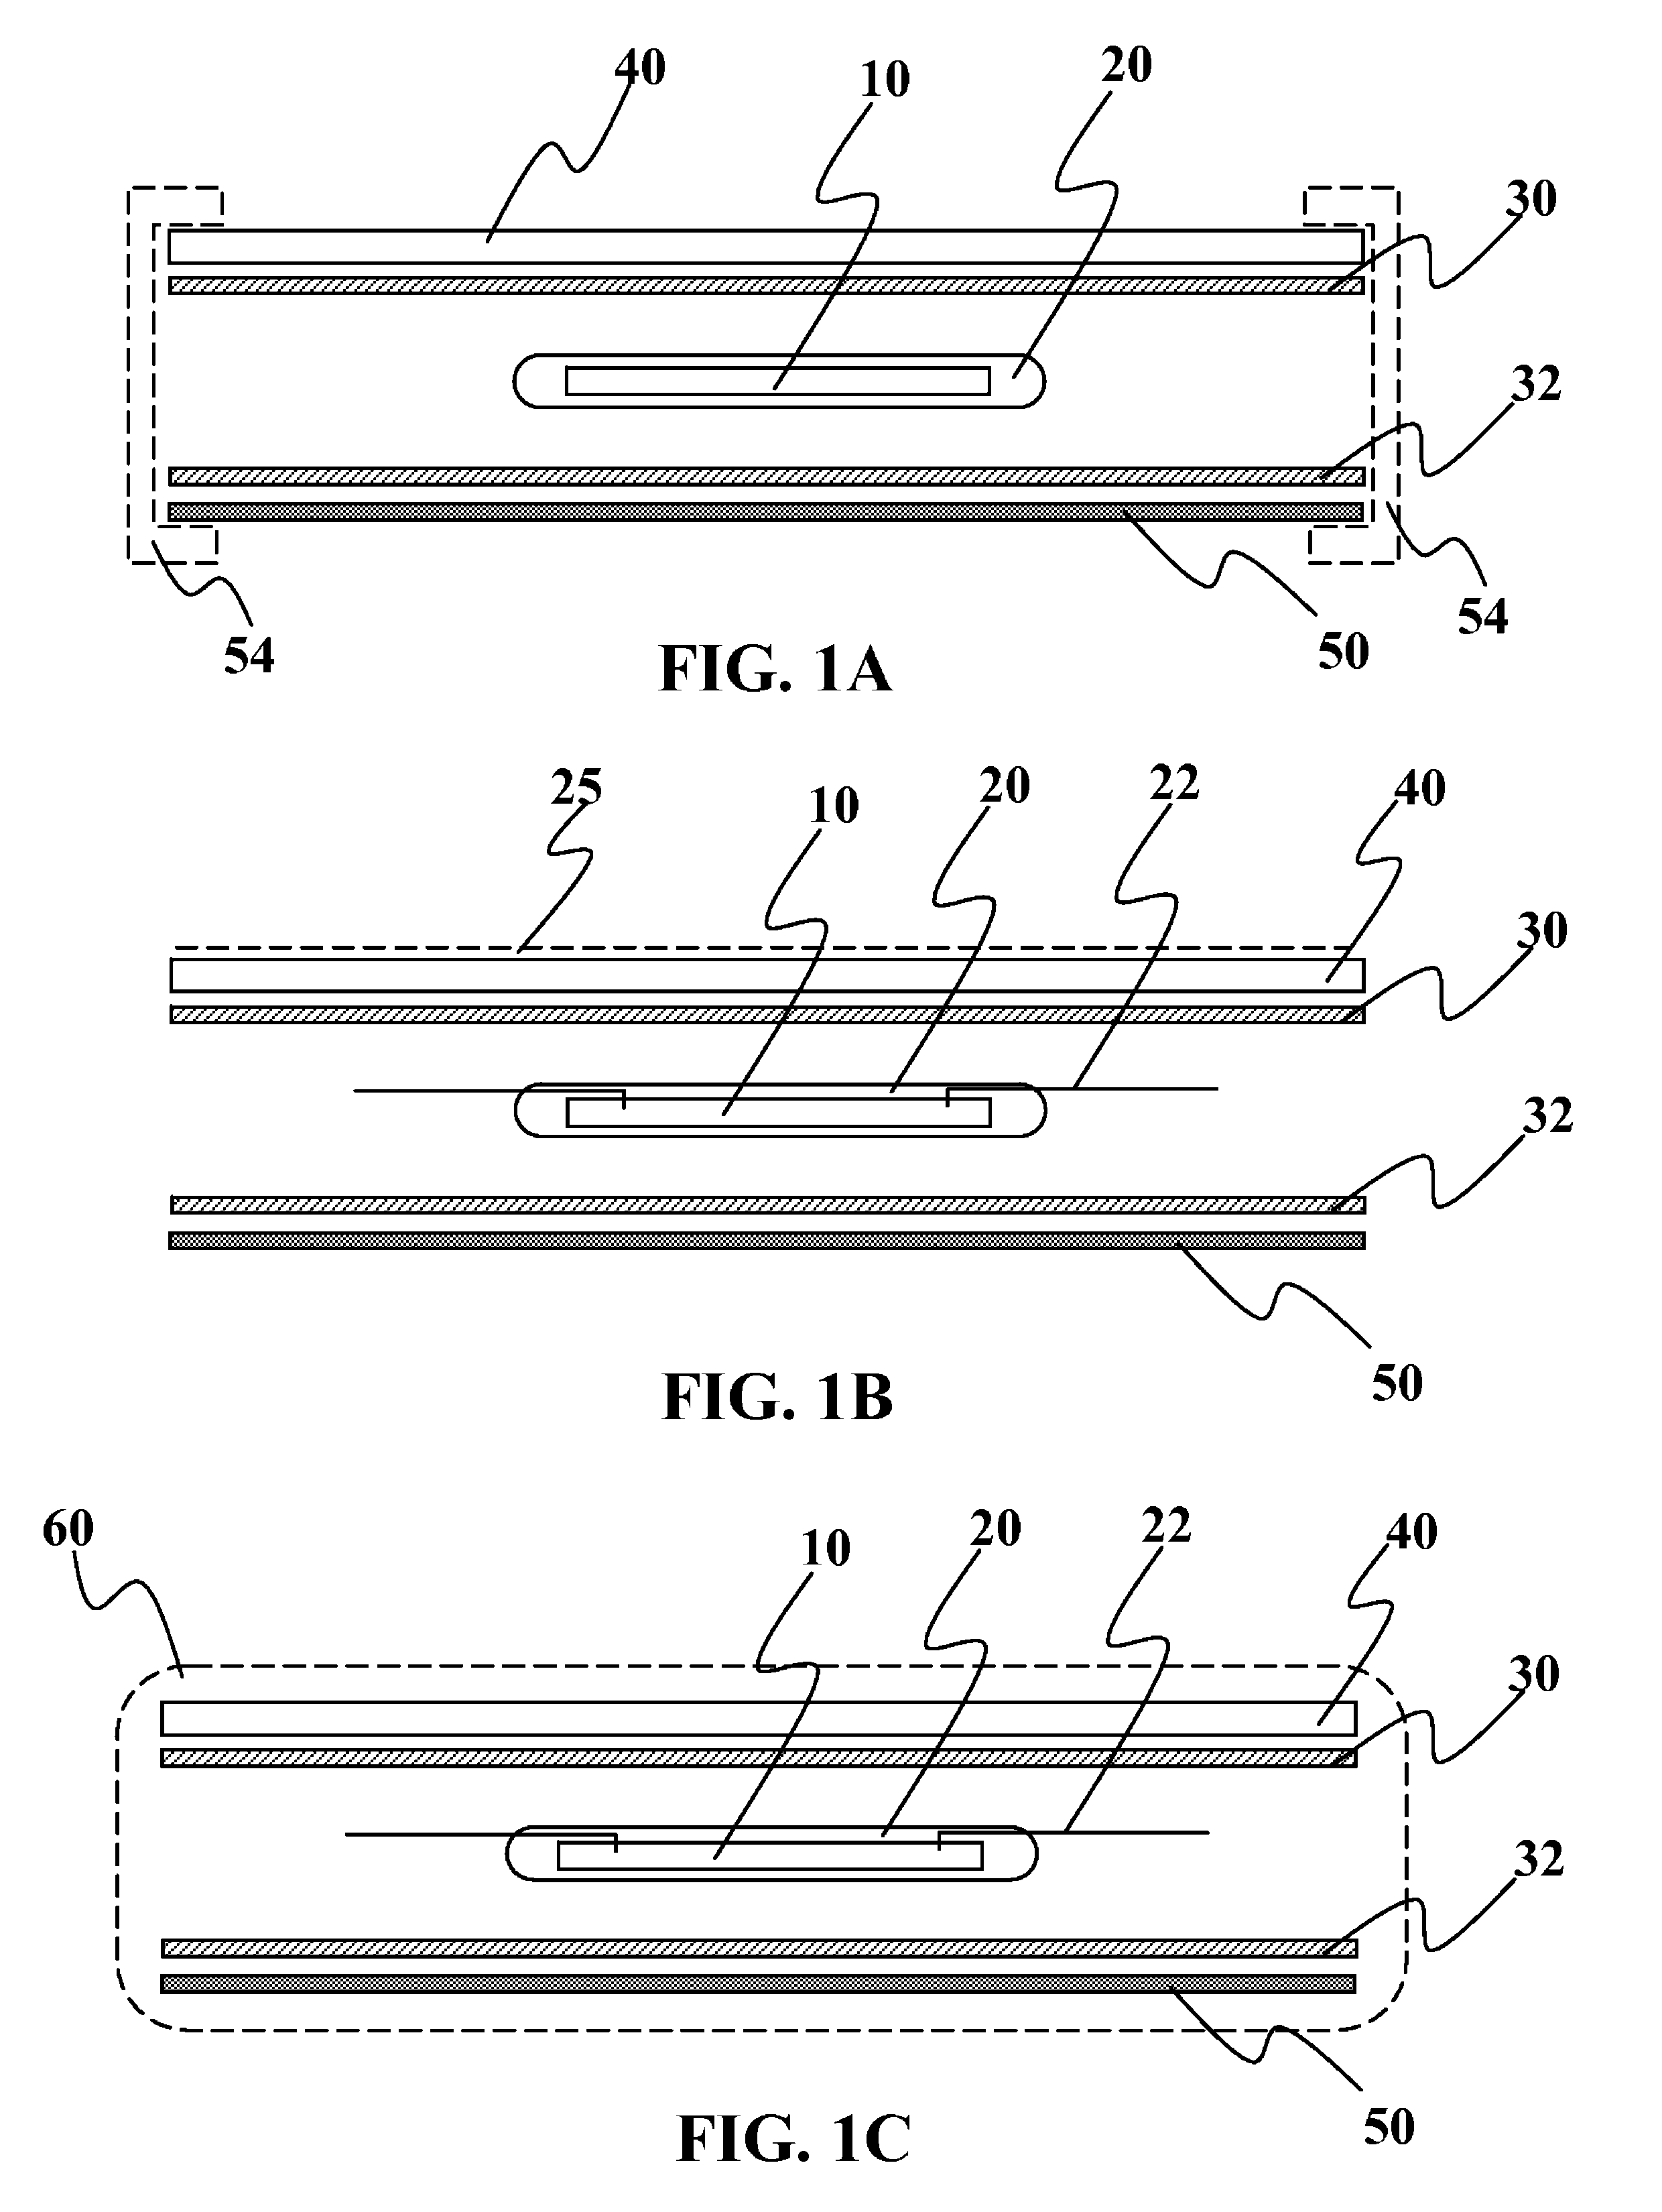 Individually encapsulated solar cells and solar cell strings